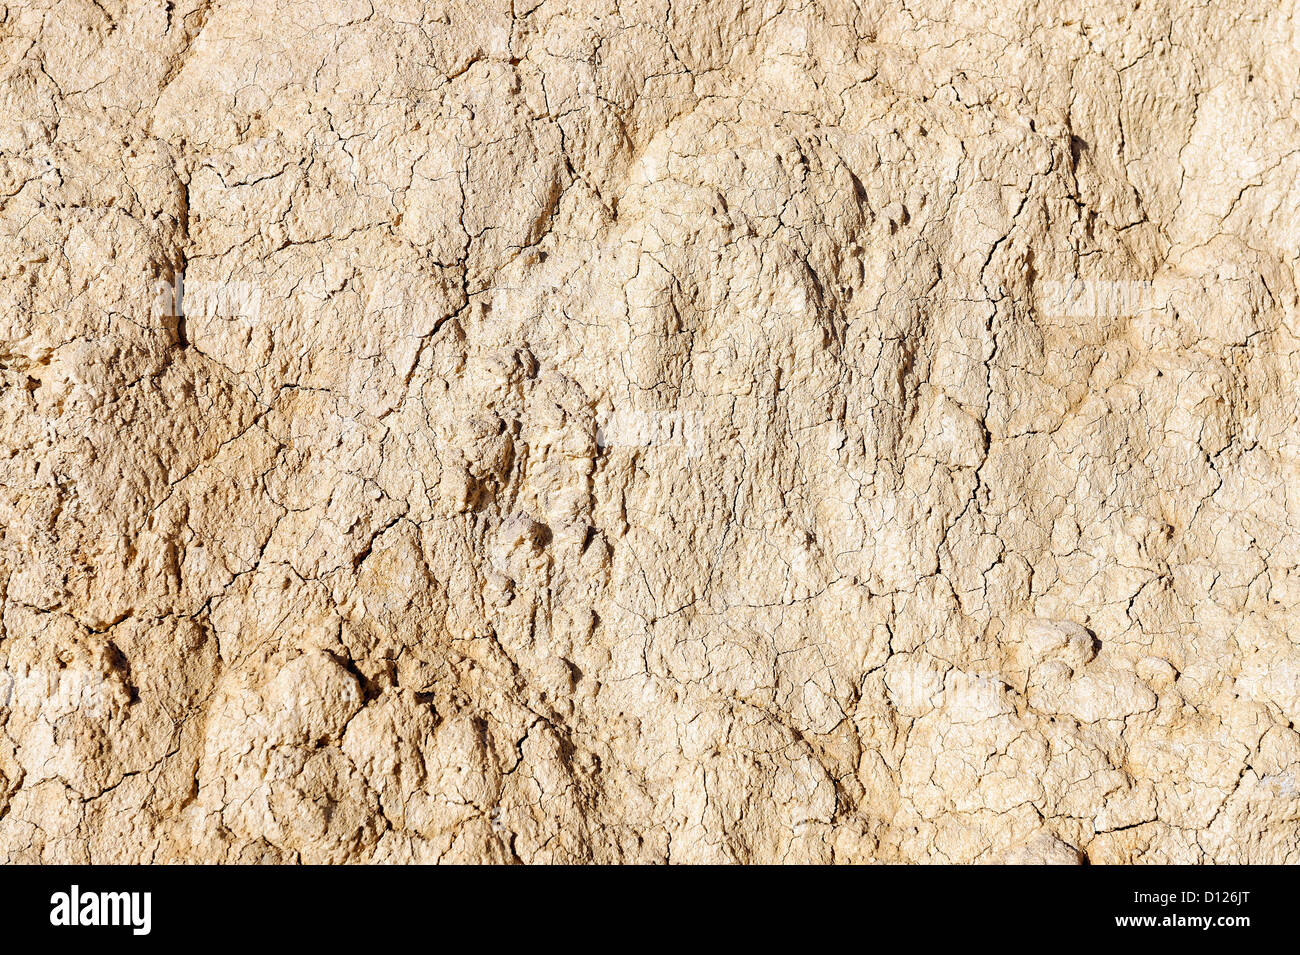 Natural clay formation detail. Stock Photo